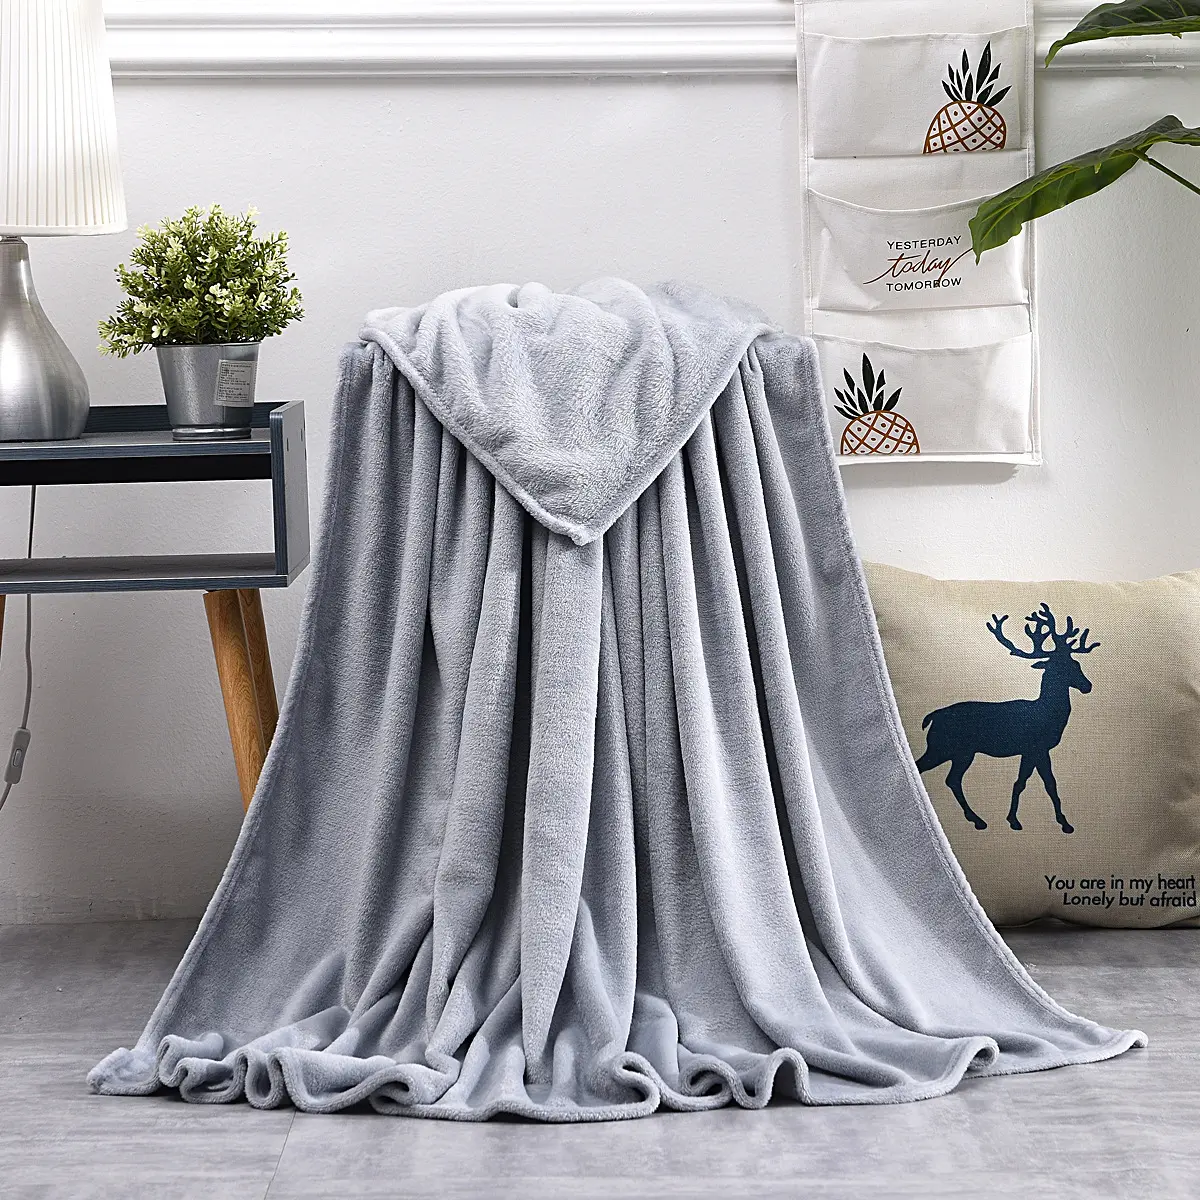 Reliable Factory Cheap Low Moq Different Color Gray Green Blue Black Baby Children Adult Pet Coral Fleece Throw Blanket